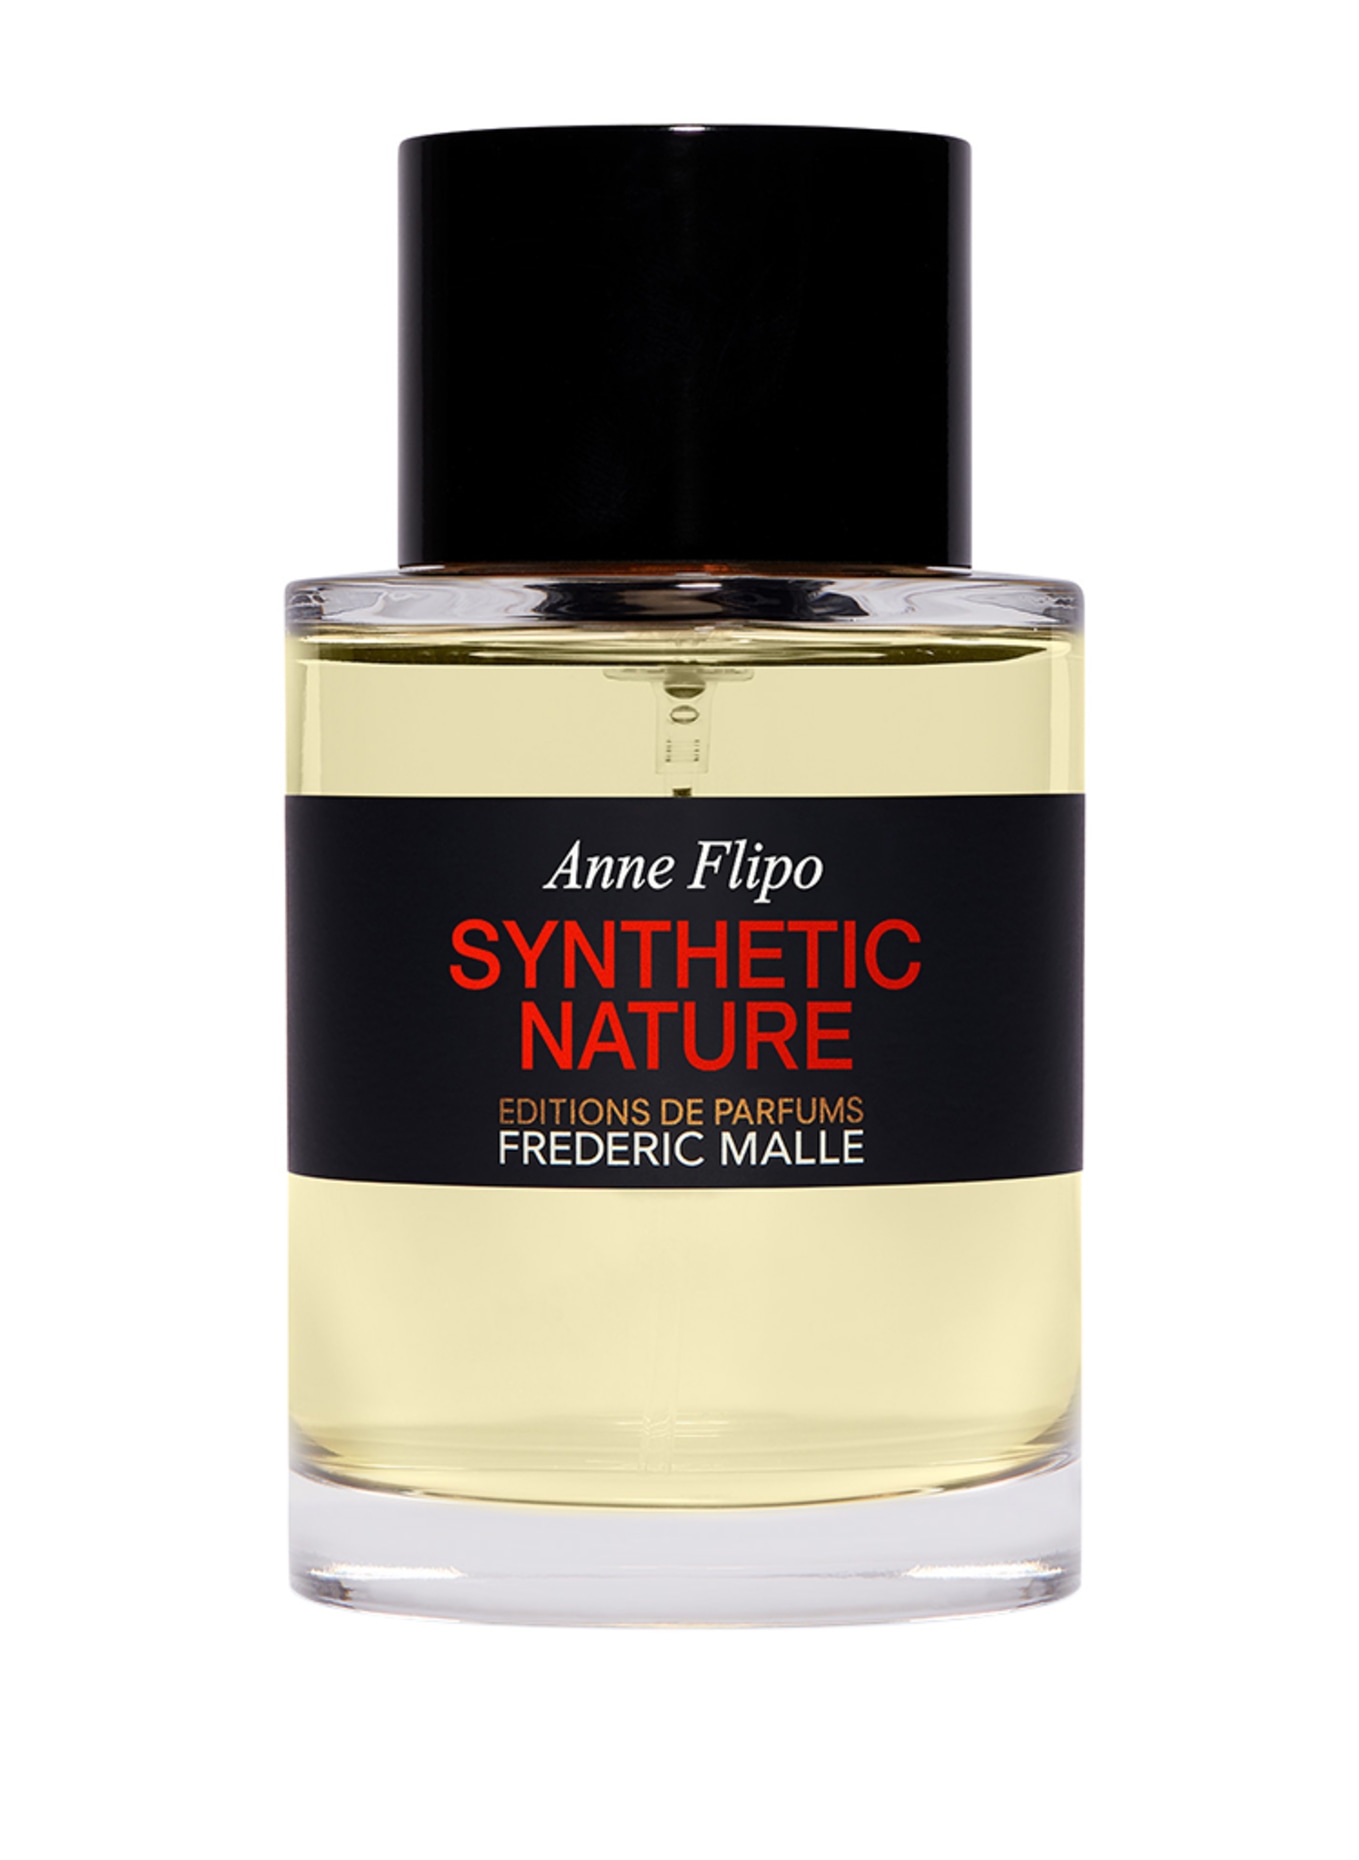 EDITIONS DE PARFUMS FREDERIC MALLE SYNTHETIC NATURE COLOGNE (Obrázek 1)